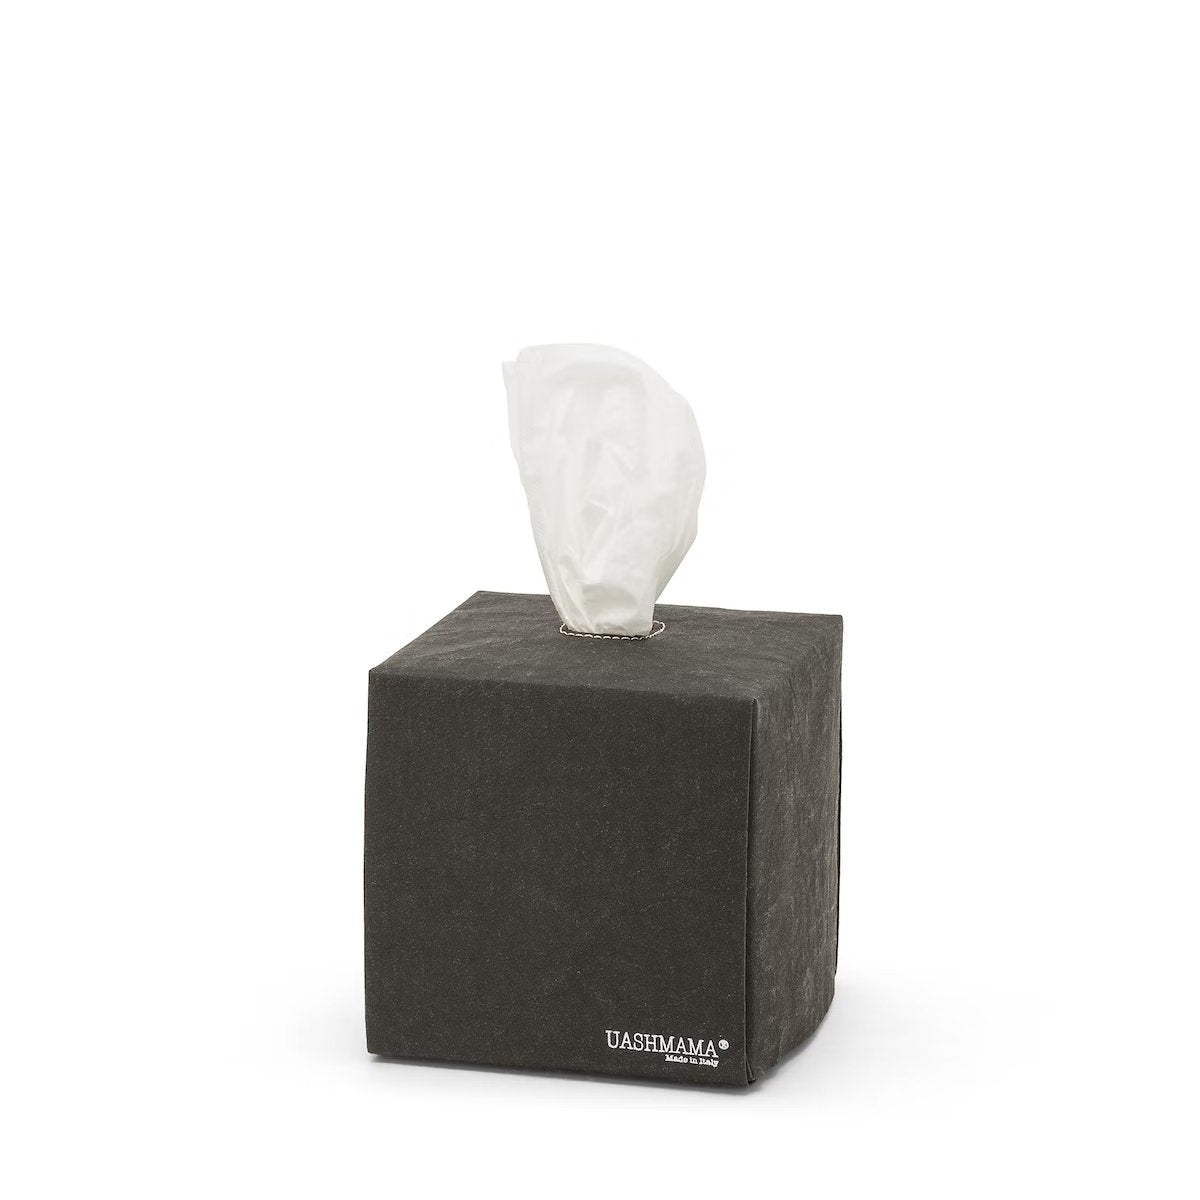 A square tissue box holder made of washable paper is shown, with a white tissue protruding from the top of the box. The UASHMAMA logo is printed in white lettering on the bottom right hand corner of the box. The tissue box cover is black.